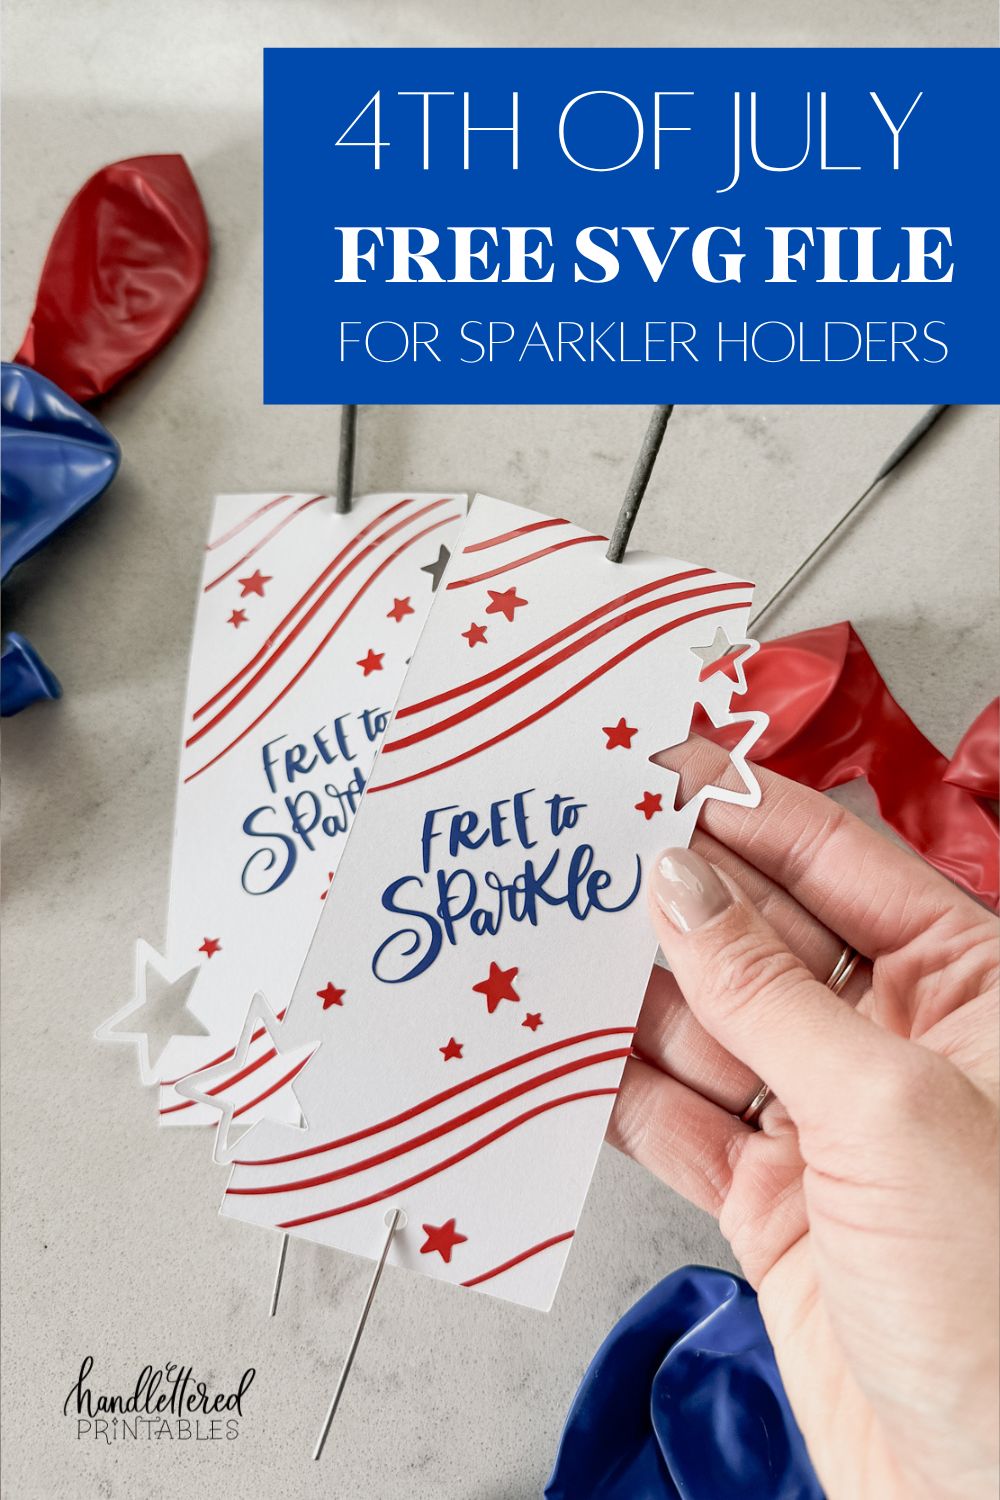 image of fourth of july sparklers holders free svg file with 3 layers, shown assembled with sparklers, being held by hand above a countertop with red and blue balloons text over reads: 4th of july free svg file for sparkler holders